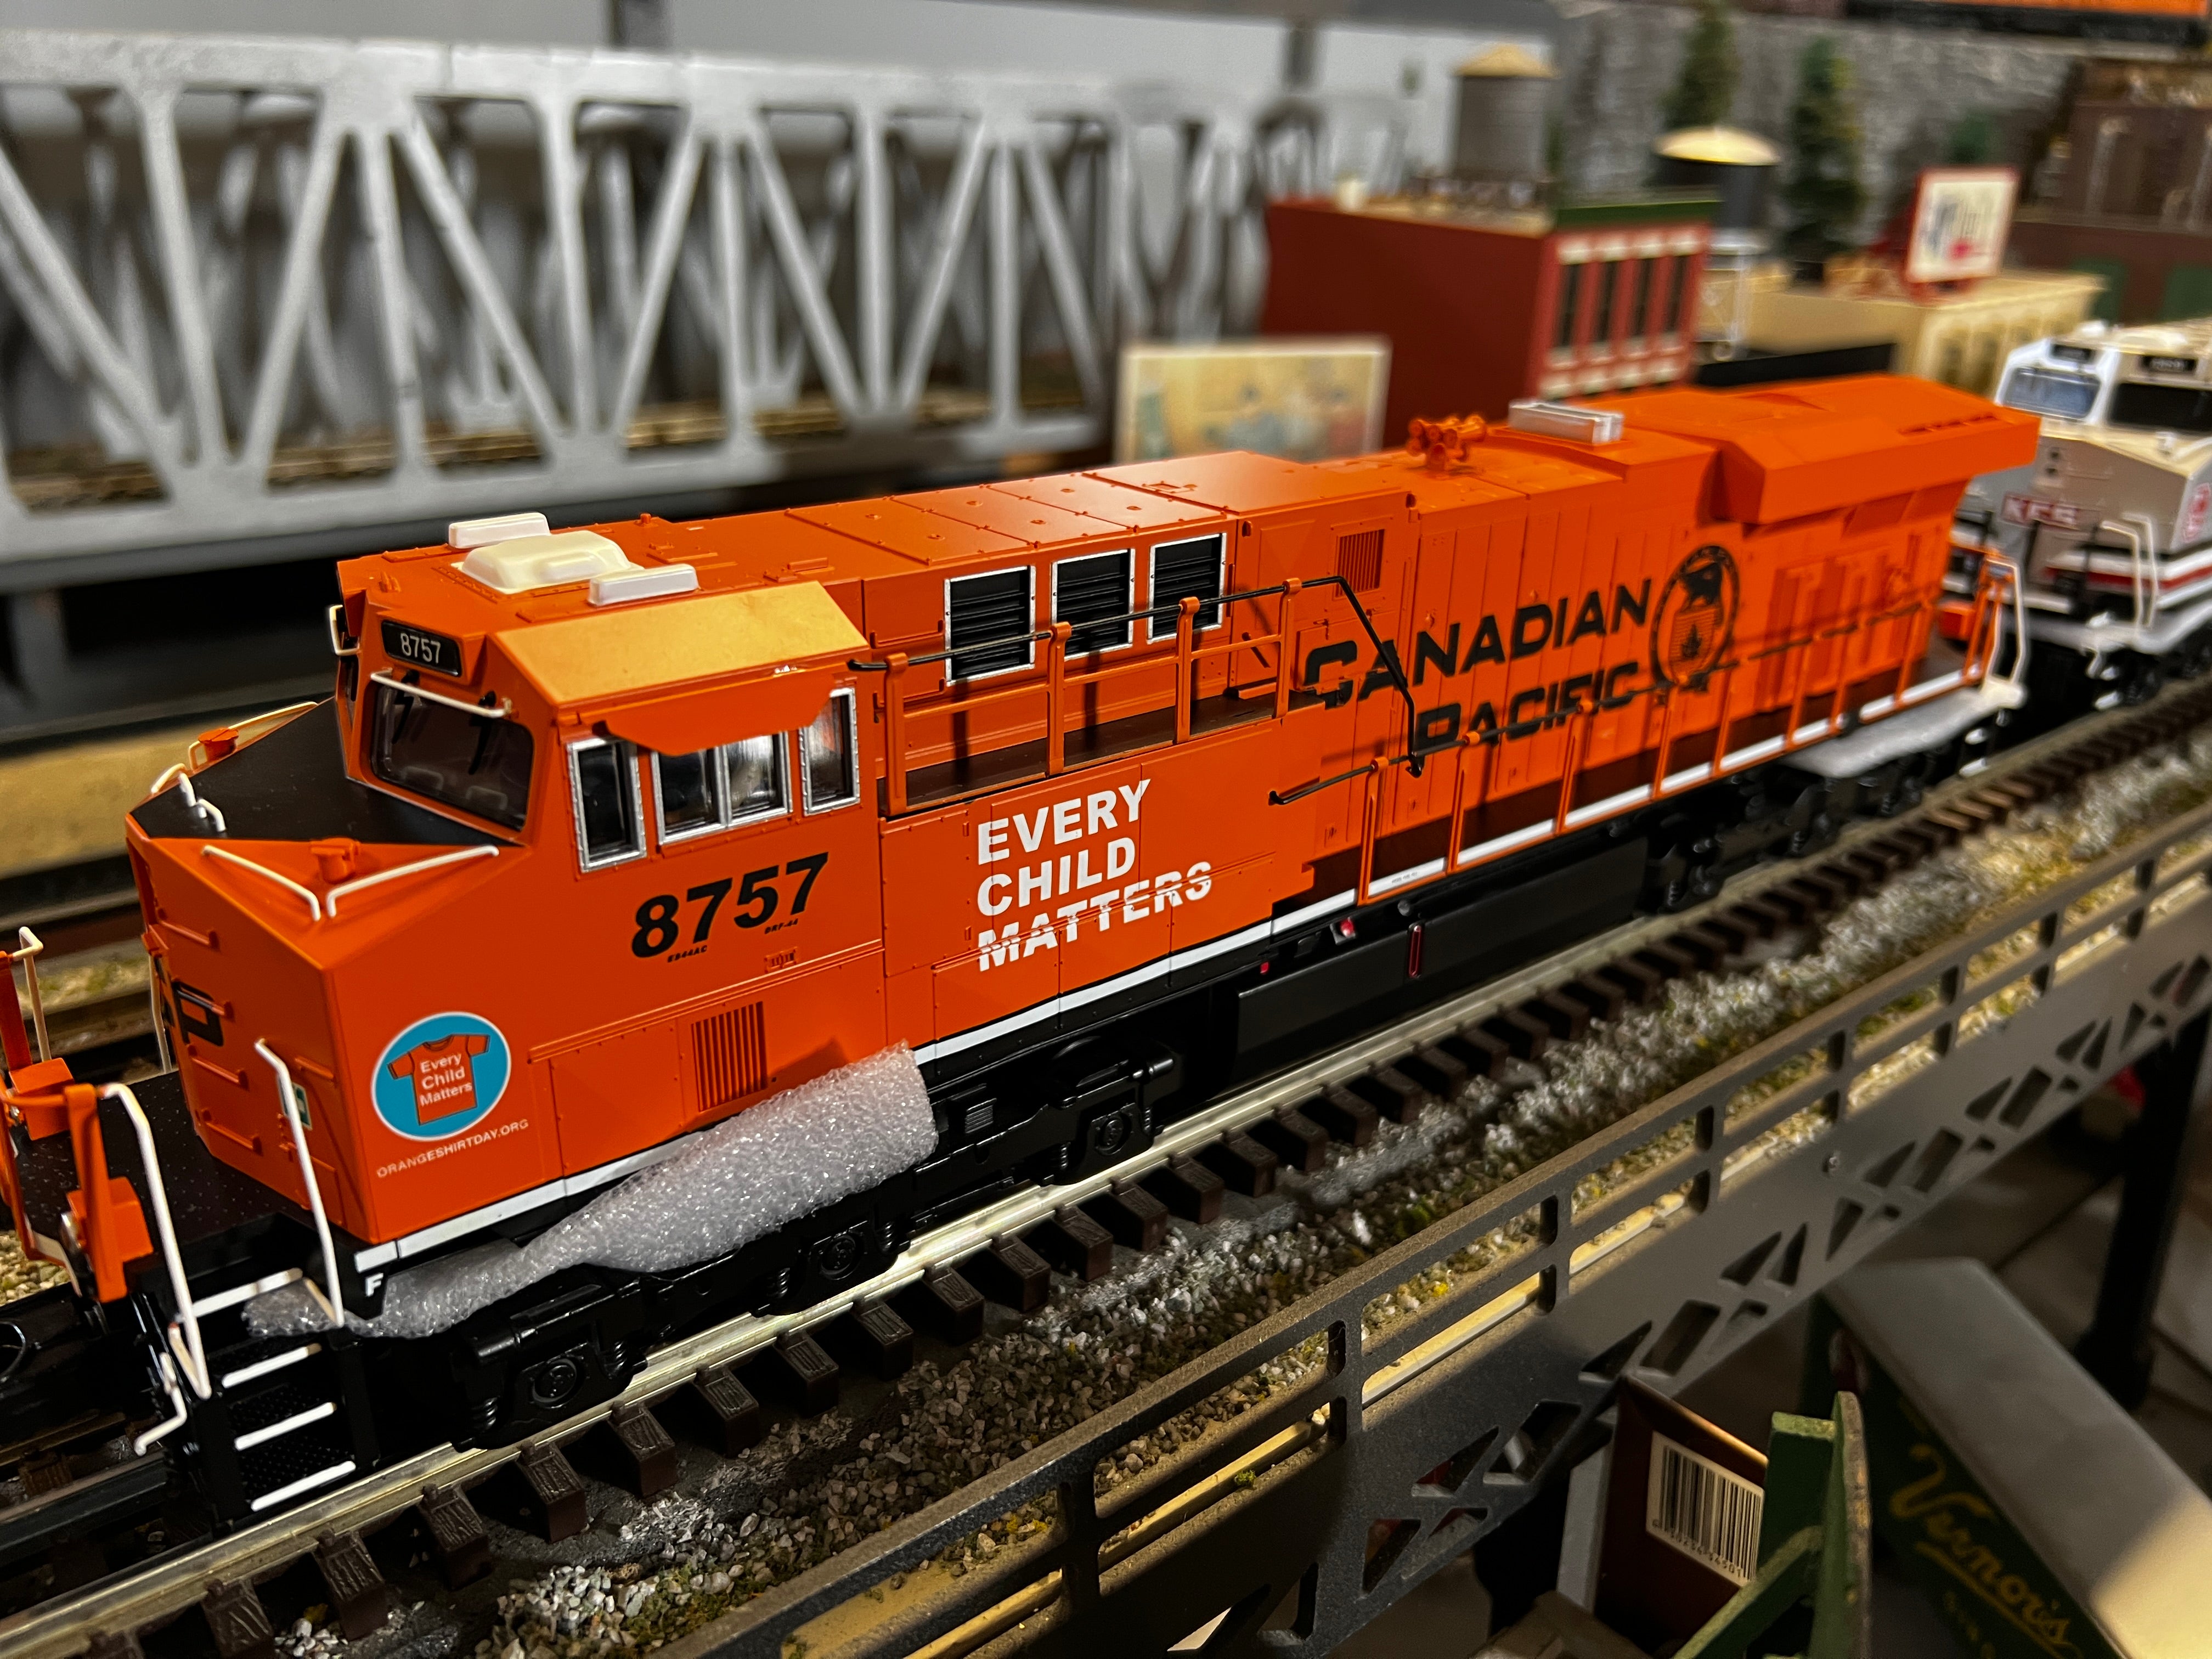 MTH 30-21160-1 - ES44AC Imperial Diesel Engine "Canadian Pacific" #8757 w/ PS3